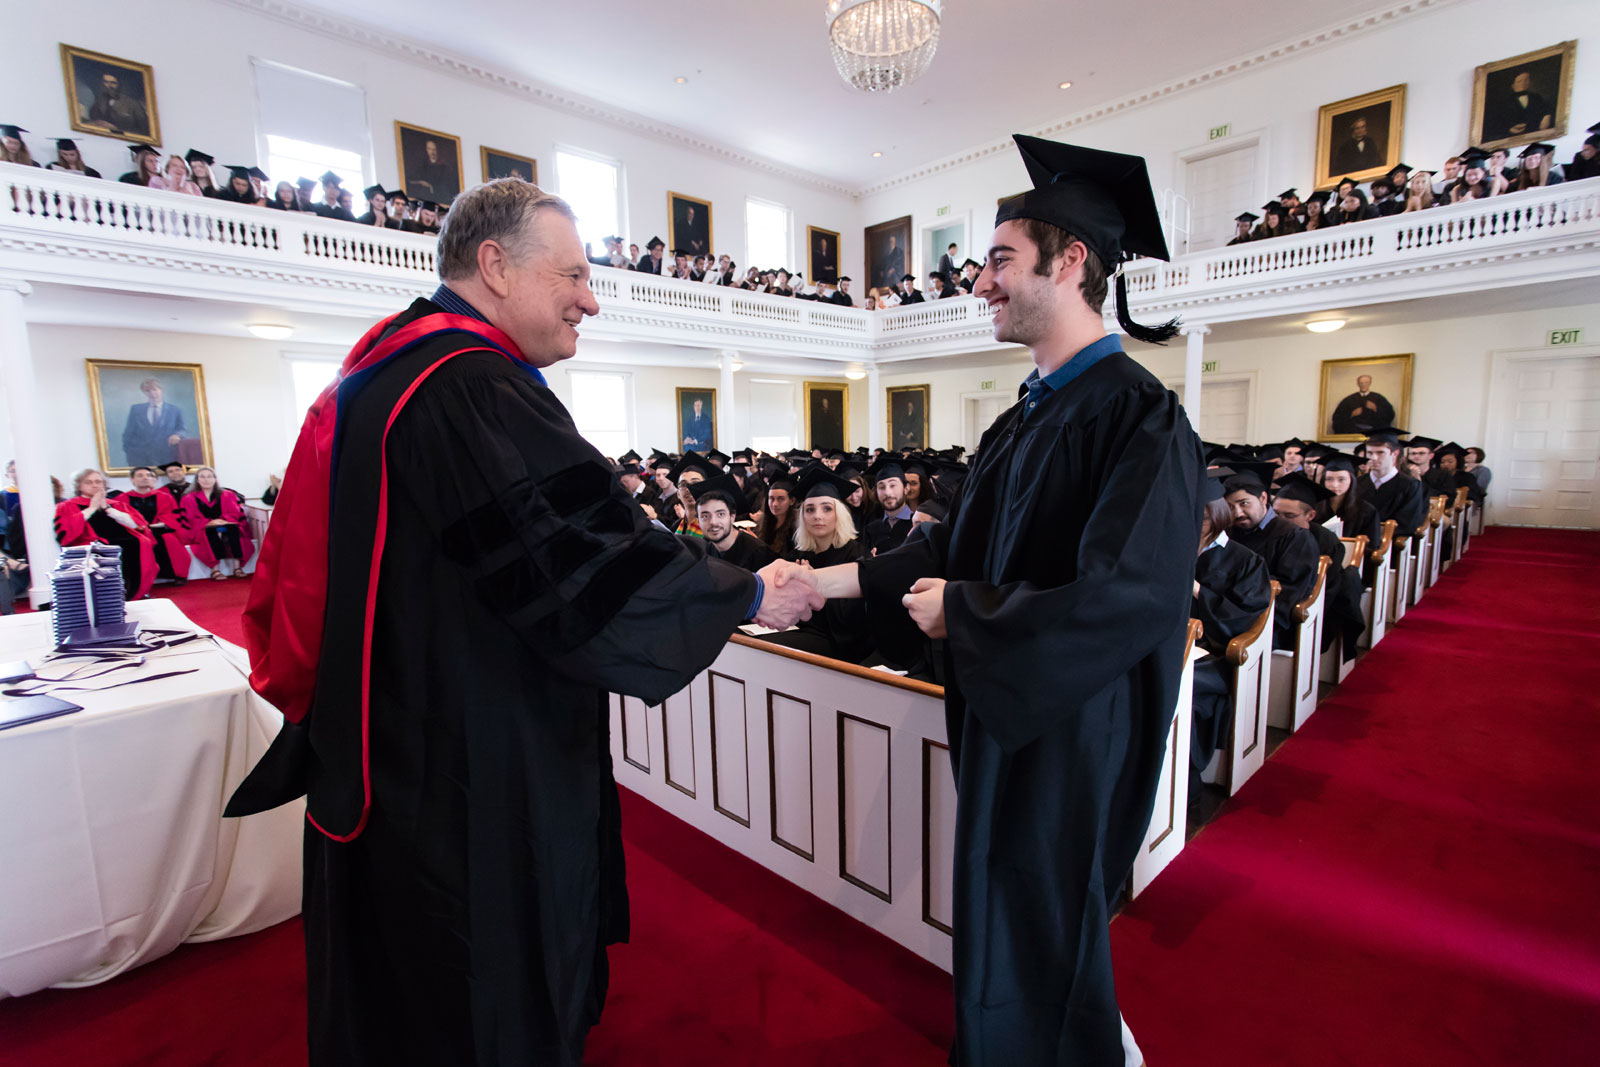 Professor Jack Cheney gives an award to a student